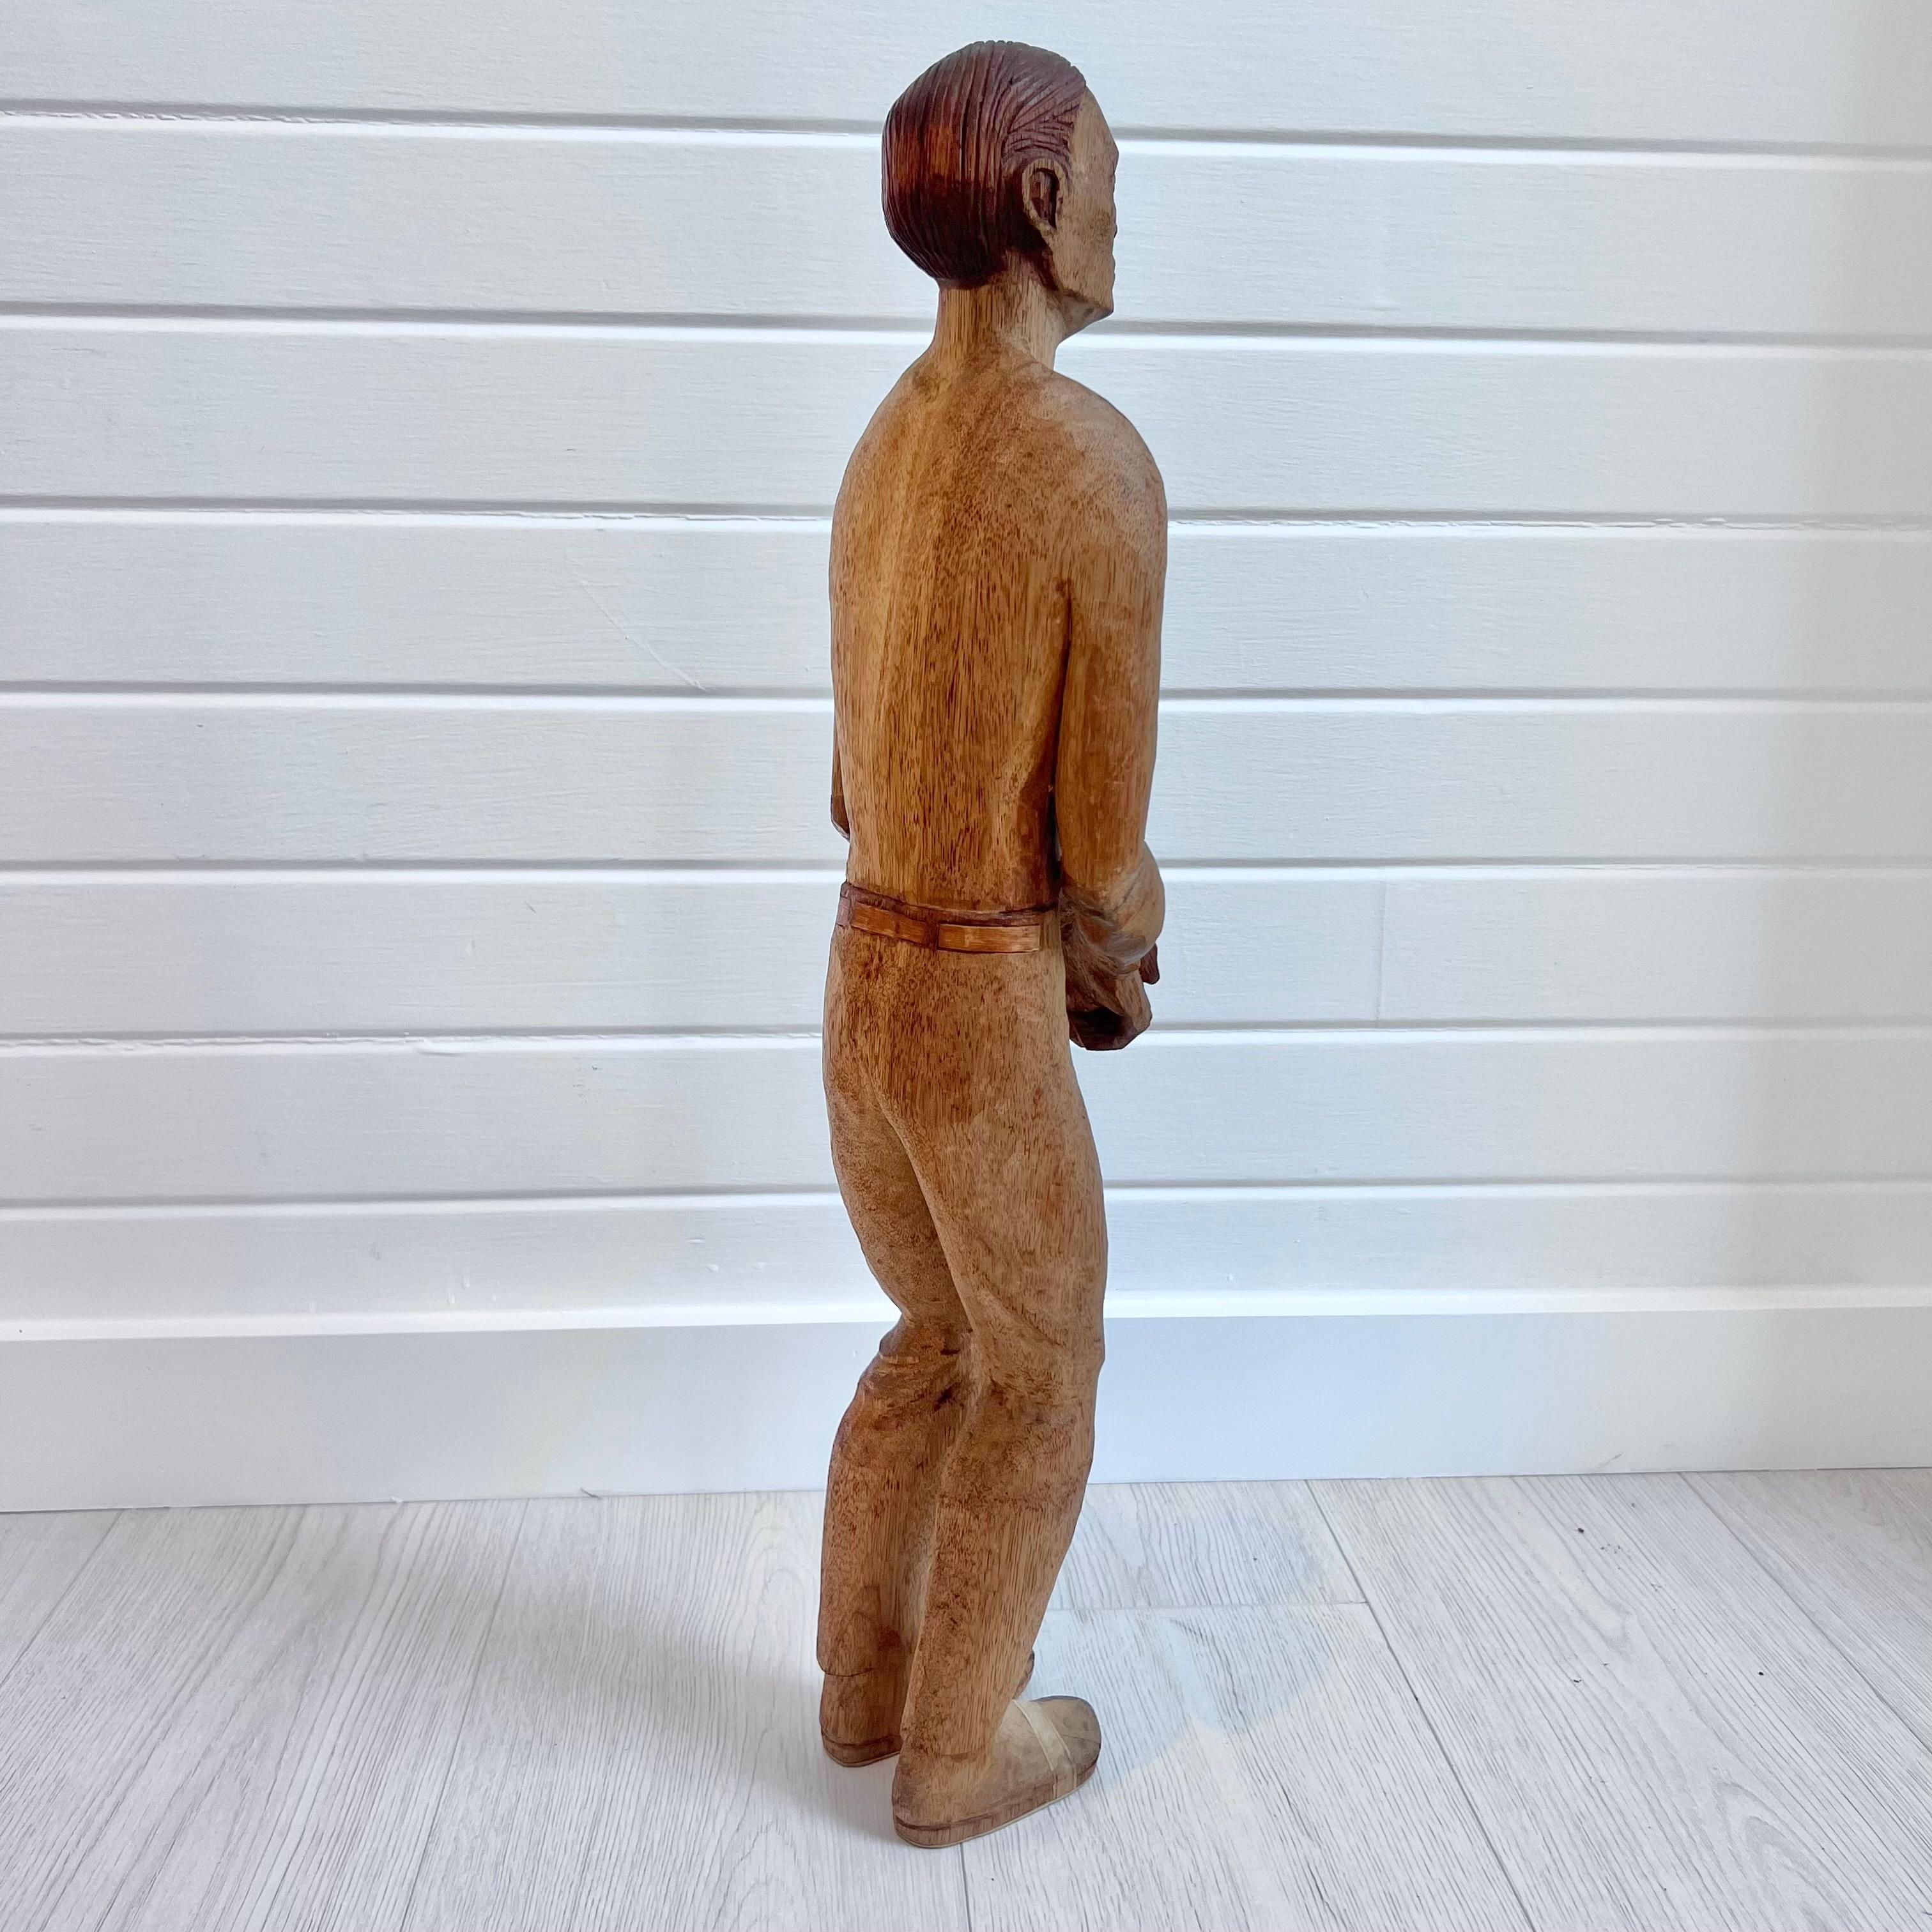 Antique Wooden Folk Art Male Figure, Early 20th century USA For Sale 1